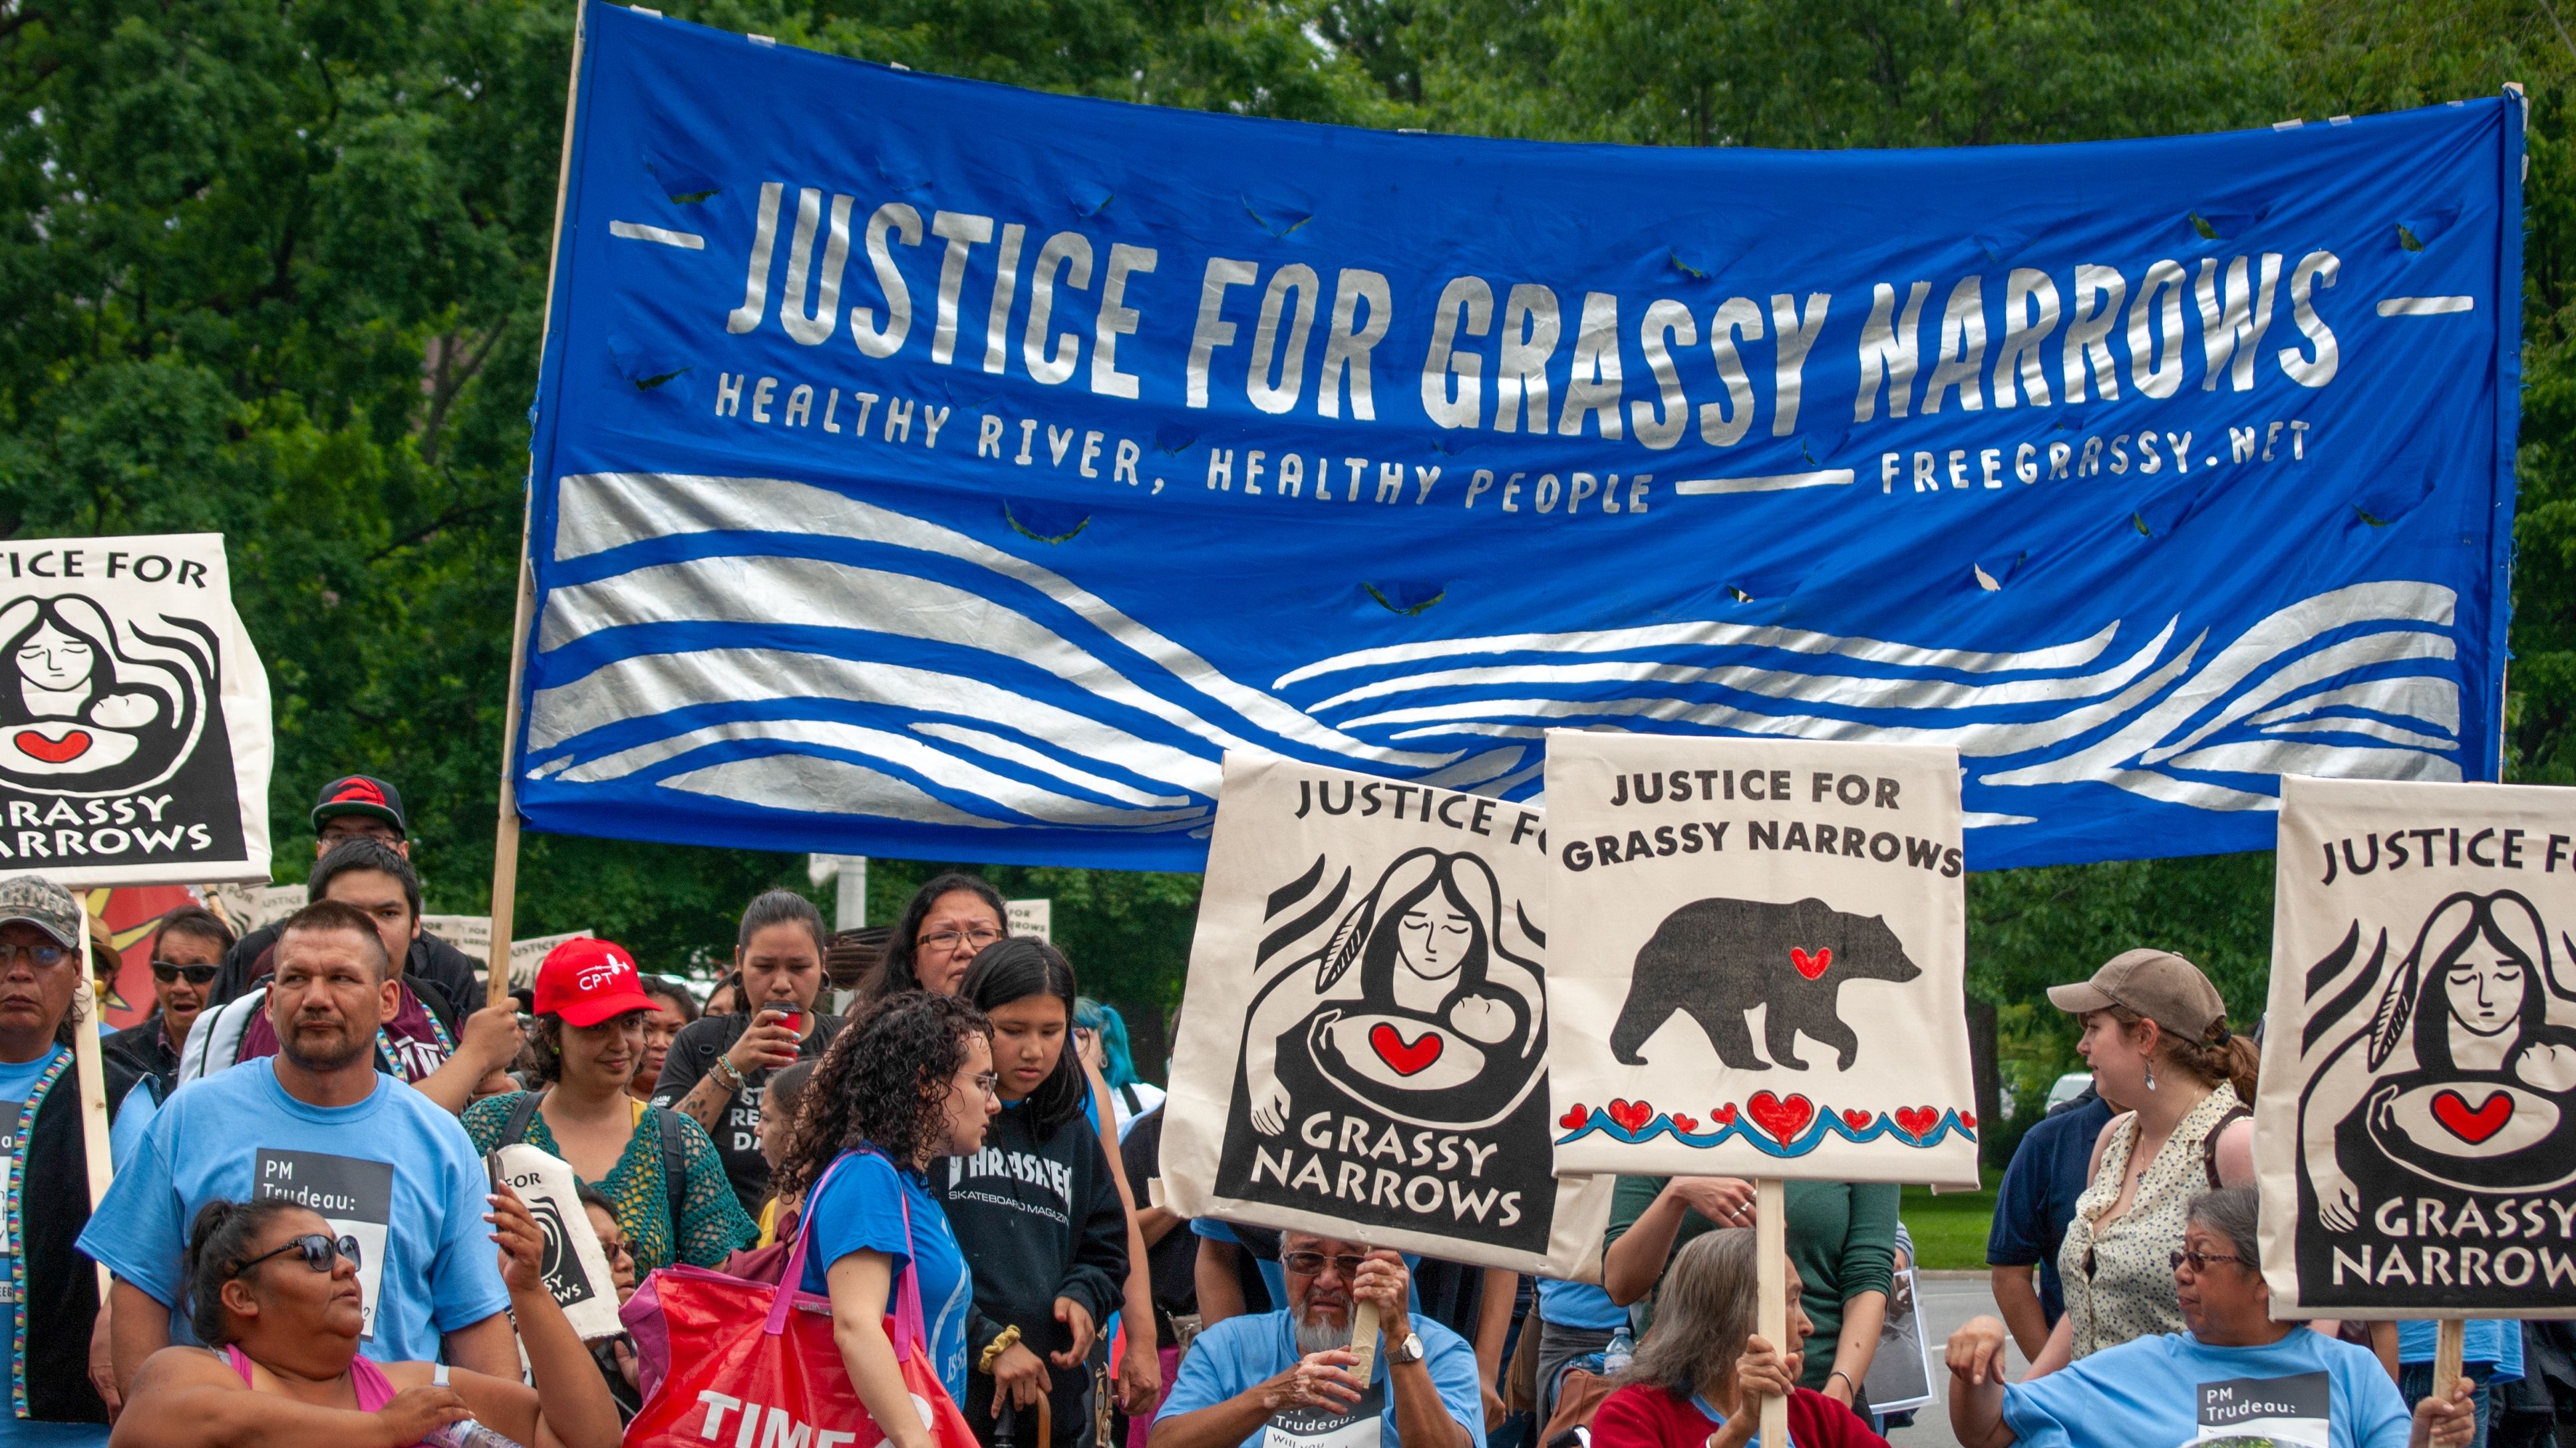 A group of Grassy Narrows First Nation residents and their supporters stand below a "Justice for Grassy Narrows" banner. Members of the Grassy Narrows First Nation traveled to Toronto to demand justice. Image by Shelby Gilson. Canada, 2019.